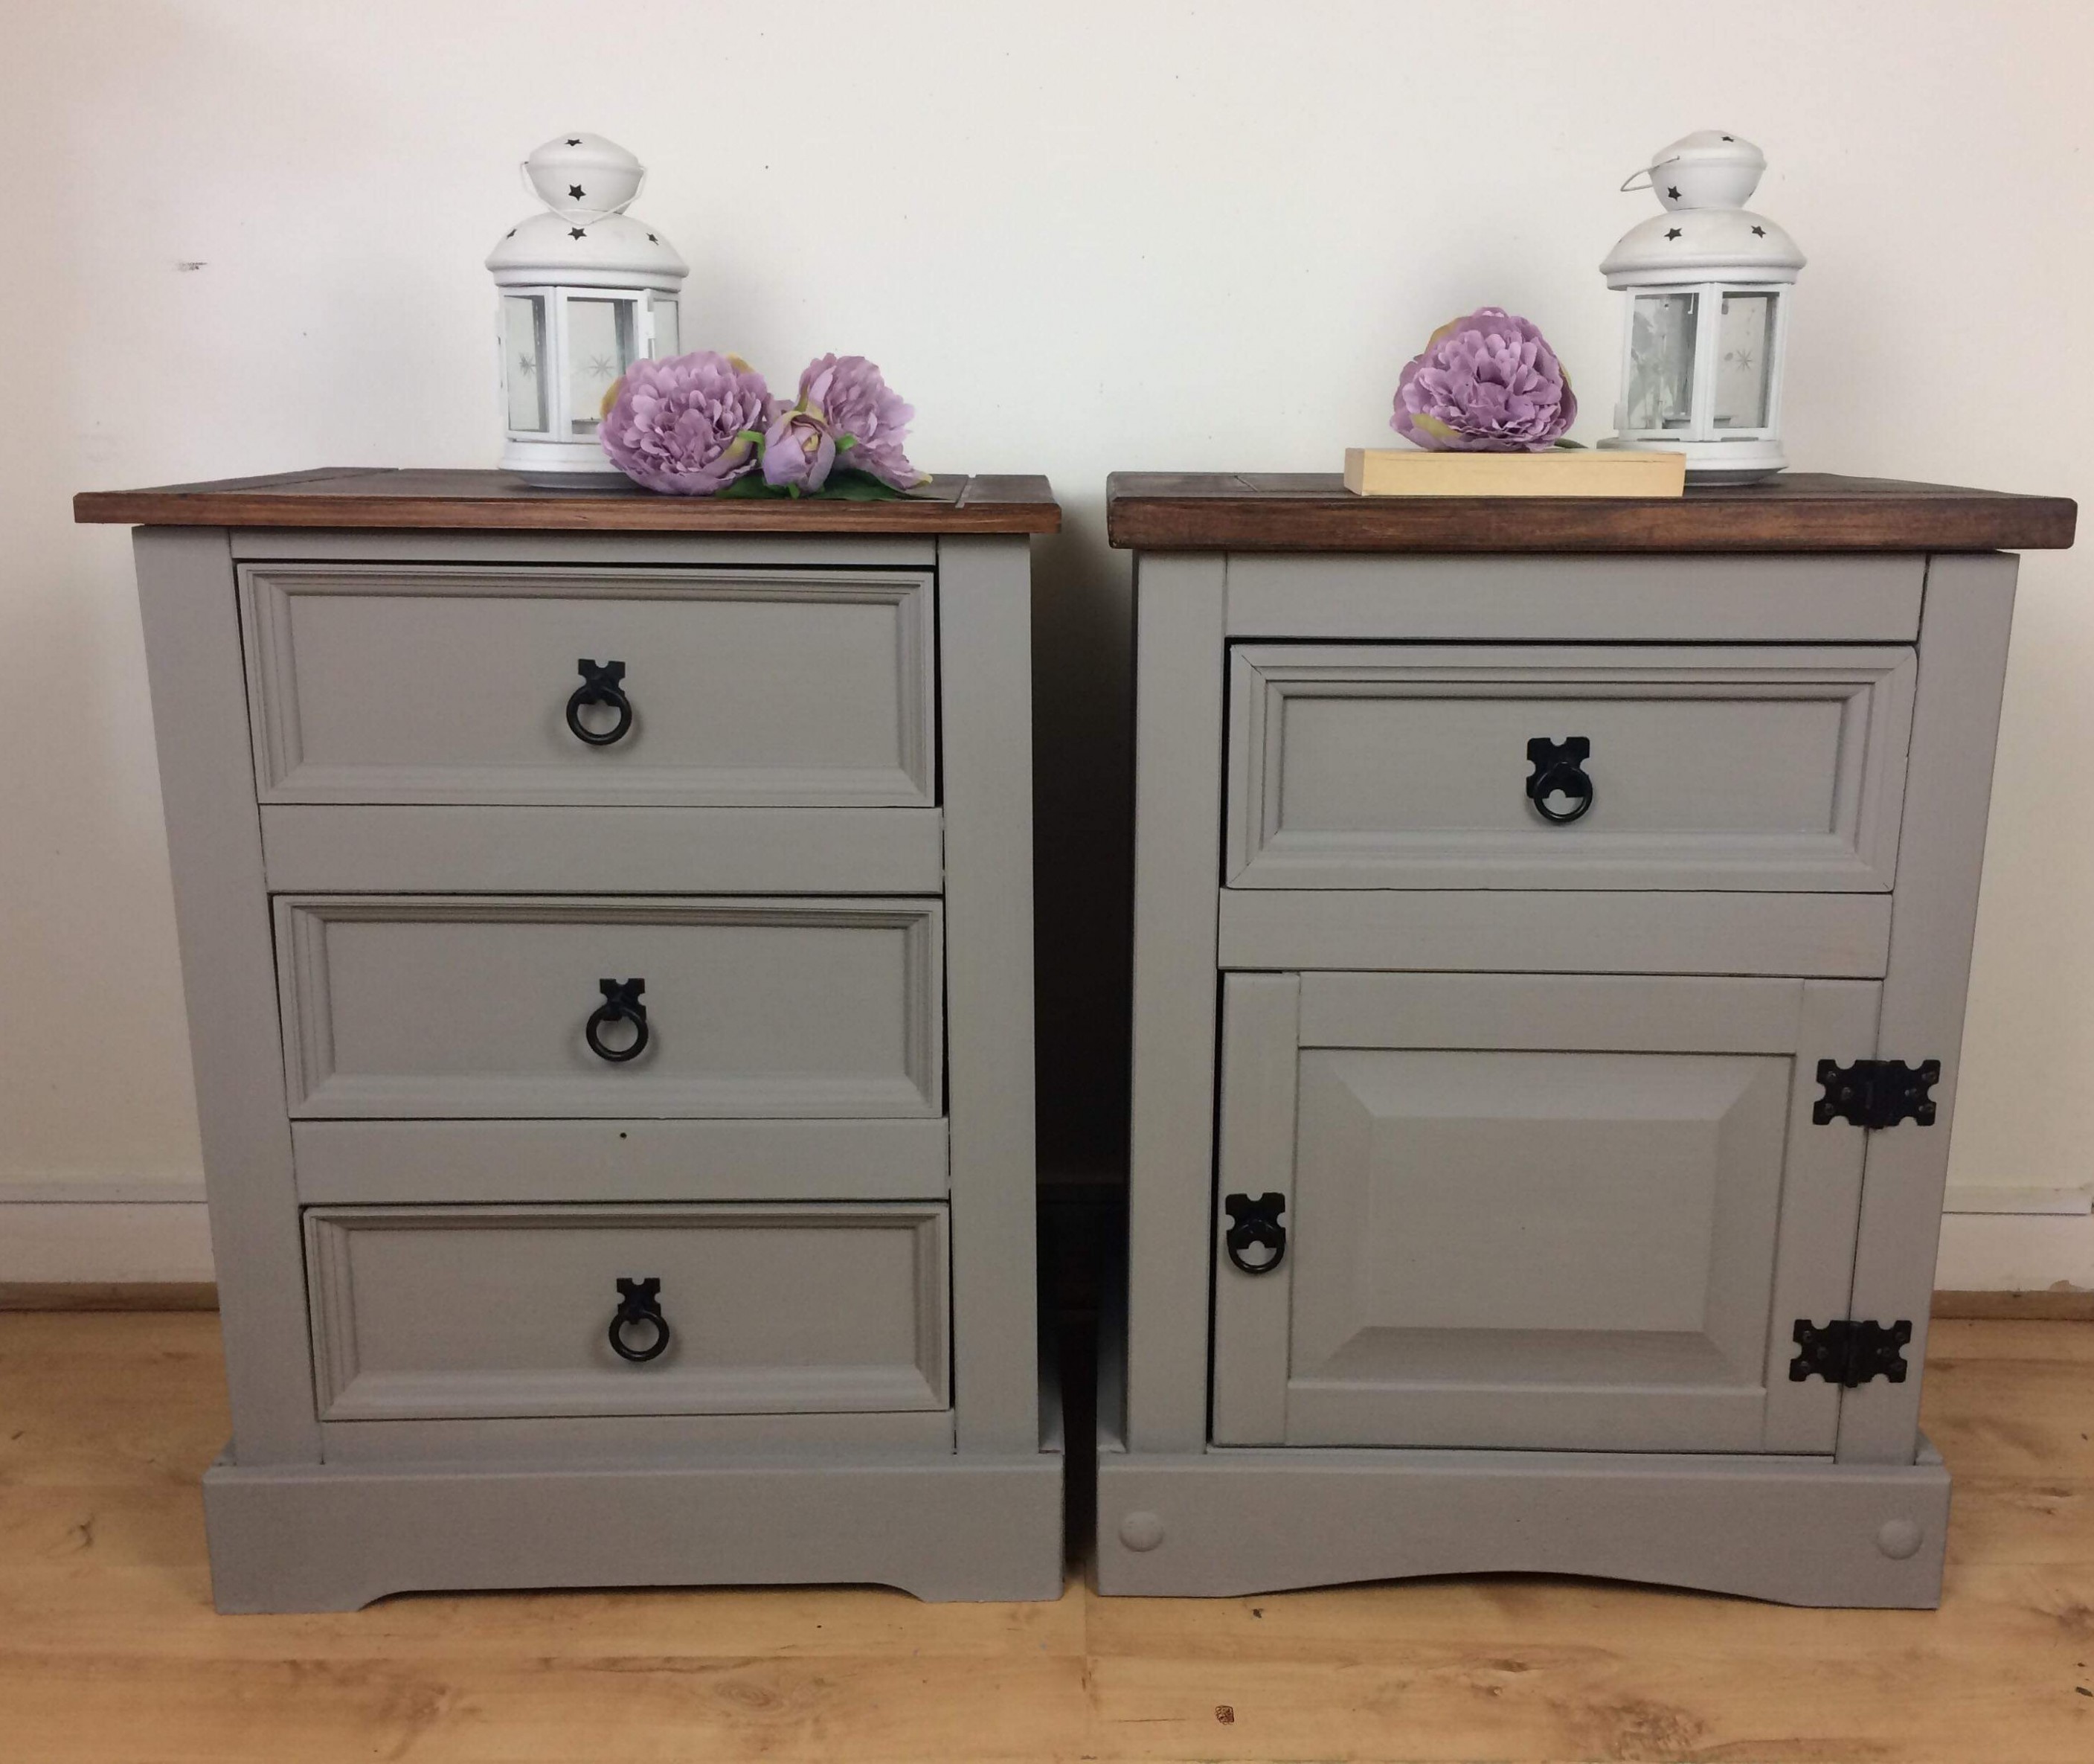 A Pair Of Rustic Mexican Corona Pine Bedside Table, Chest Of Drawers Hand Painted In Annie Sloan French Linen Chalk Paint Upcycled How To Use Chalk Paint On Pine Wood